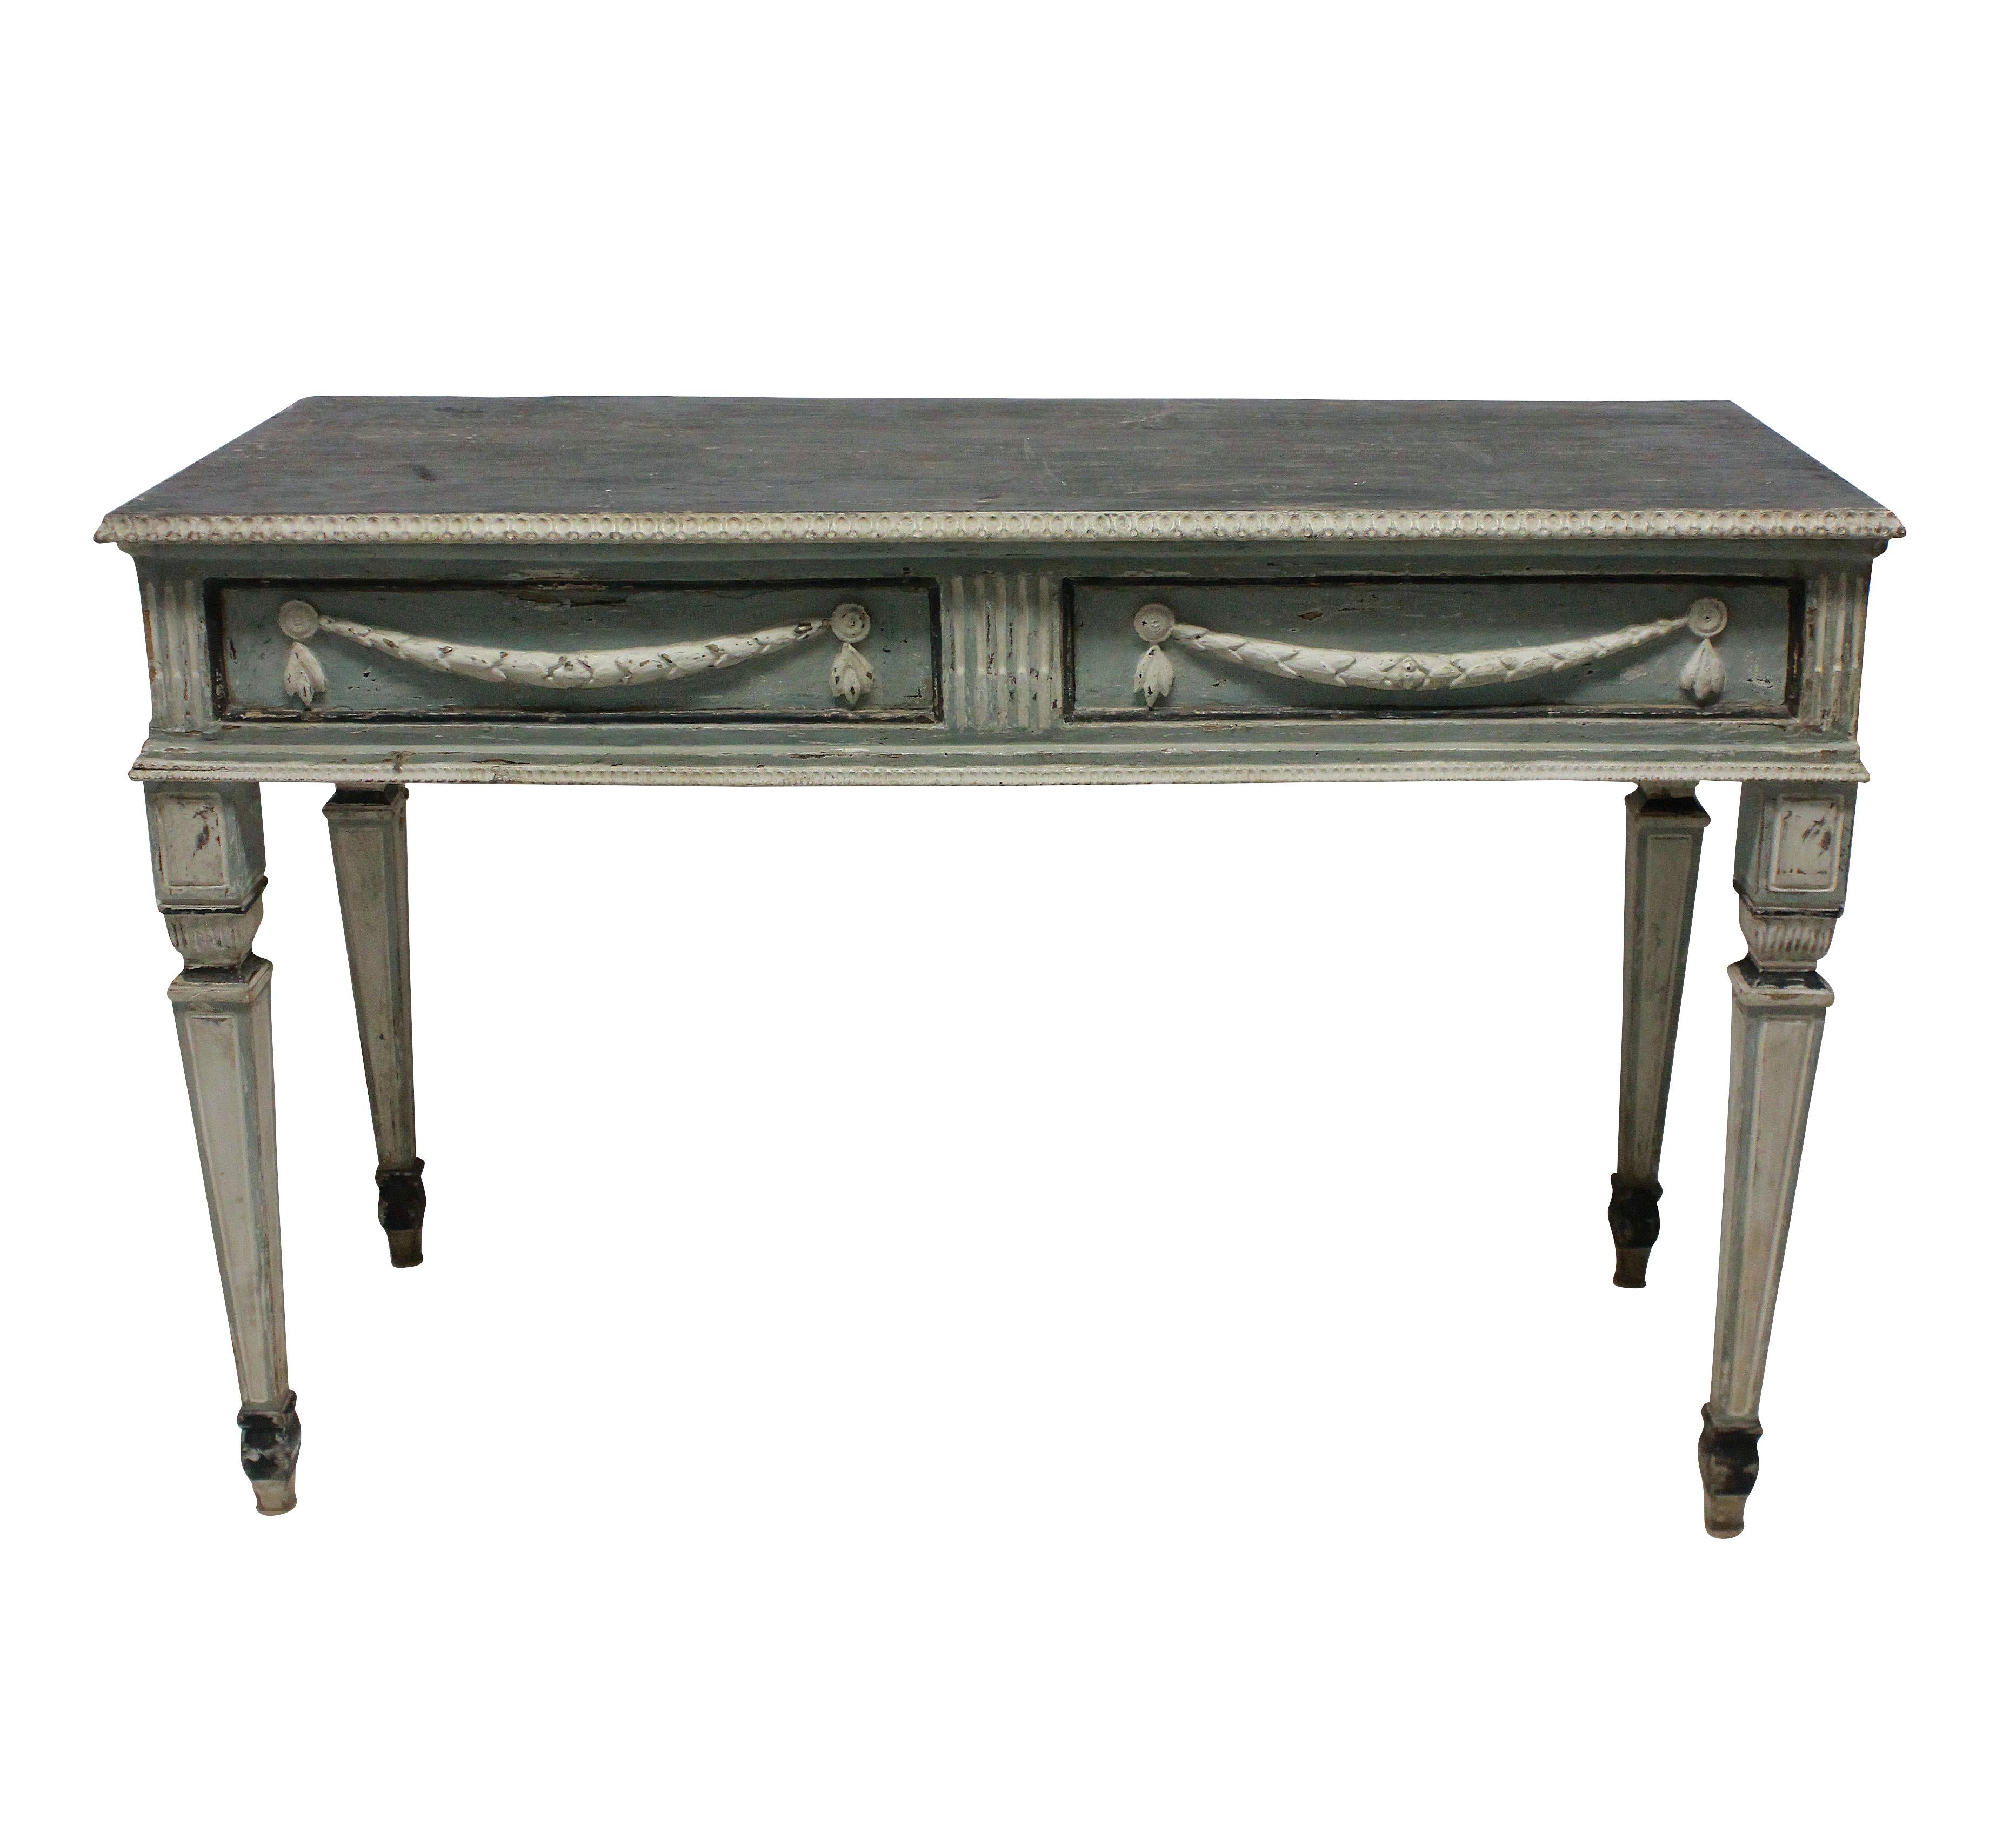 A pair of large scale Swedish 18th century console tables in the neoclassical taste. All of the paint is original and the colours are beautifully subtle.